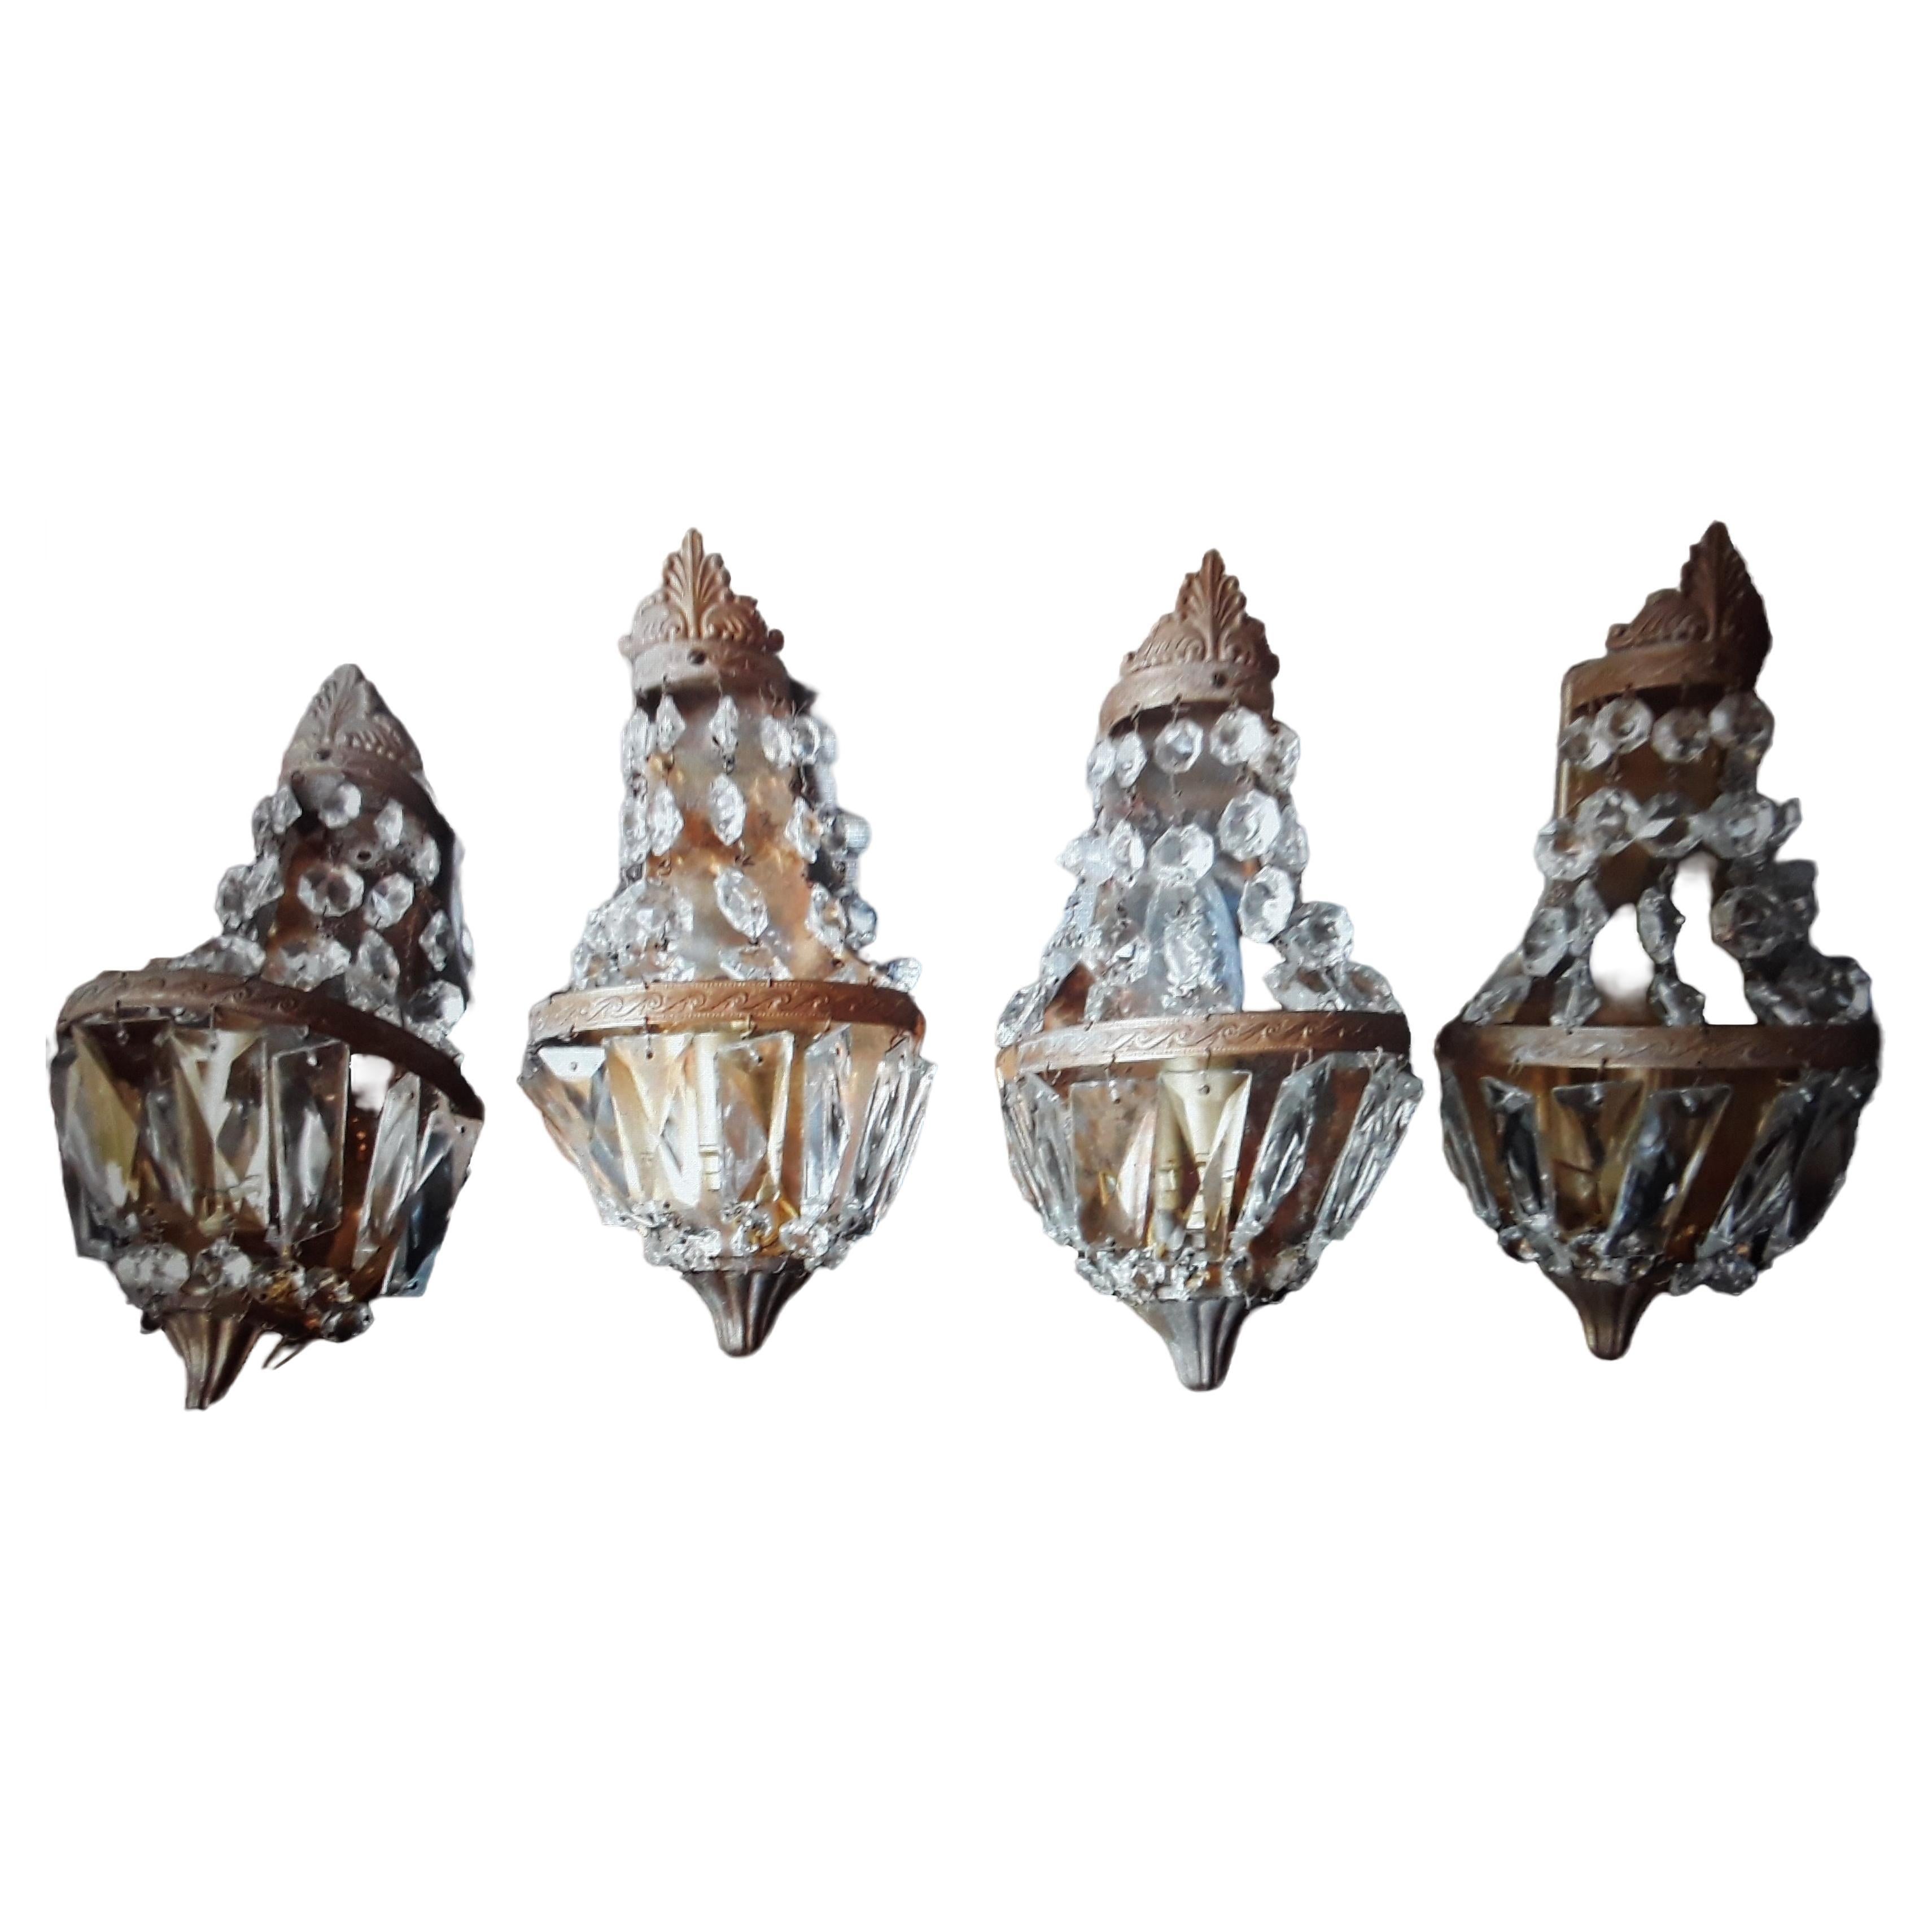 Set of 4 c1920's French Louis XVI style Bronze w/ Cascading Crystal Wall Sconces